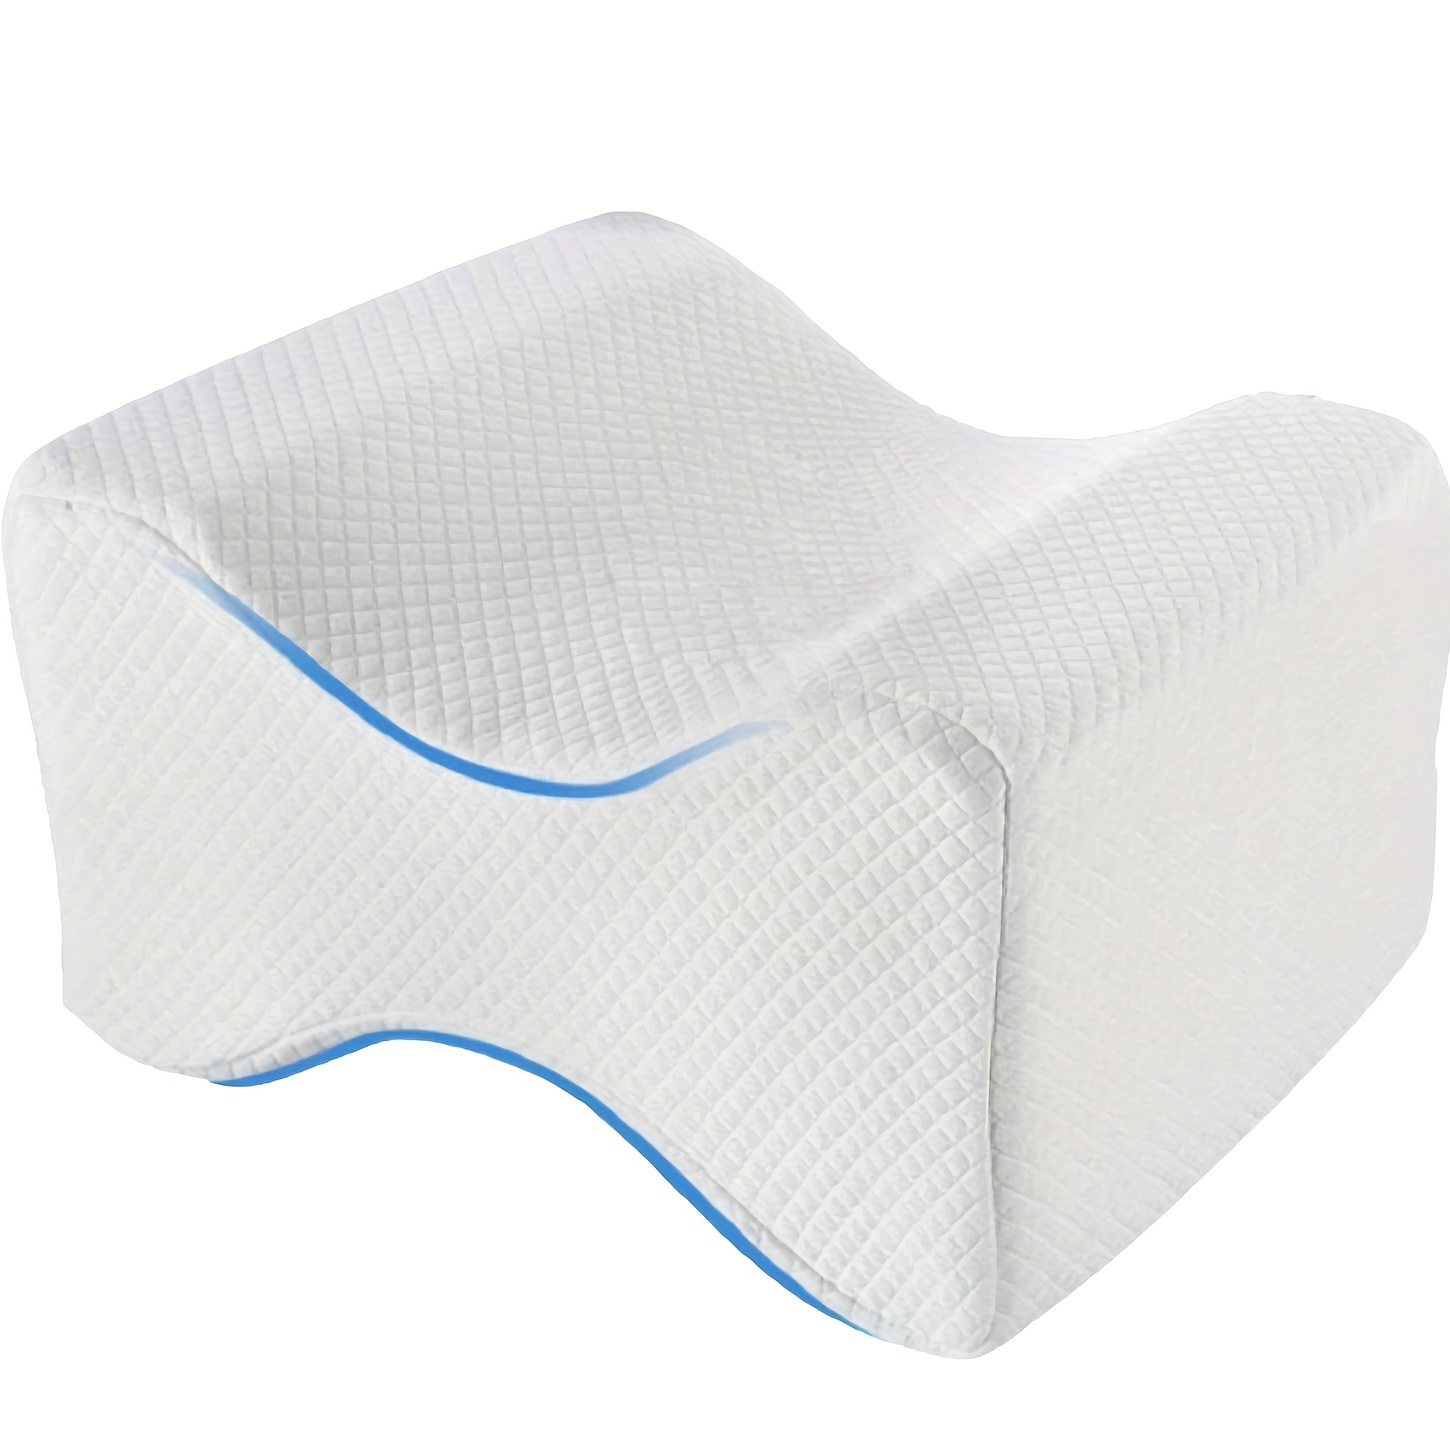 Knee Pillow for Side Sleepers - 100% Memory Foam Wedge Contour- Spacer  Cushion for Spine Alignment, Back Pain, Pregnancy Support - AliExpress